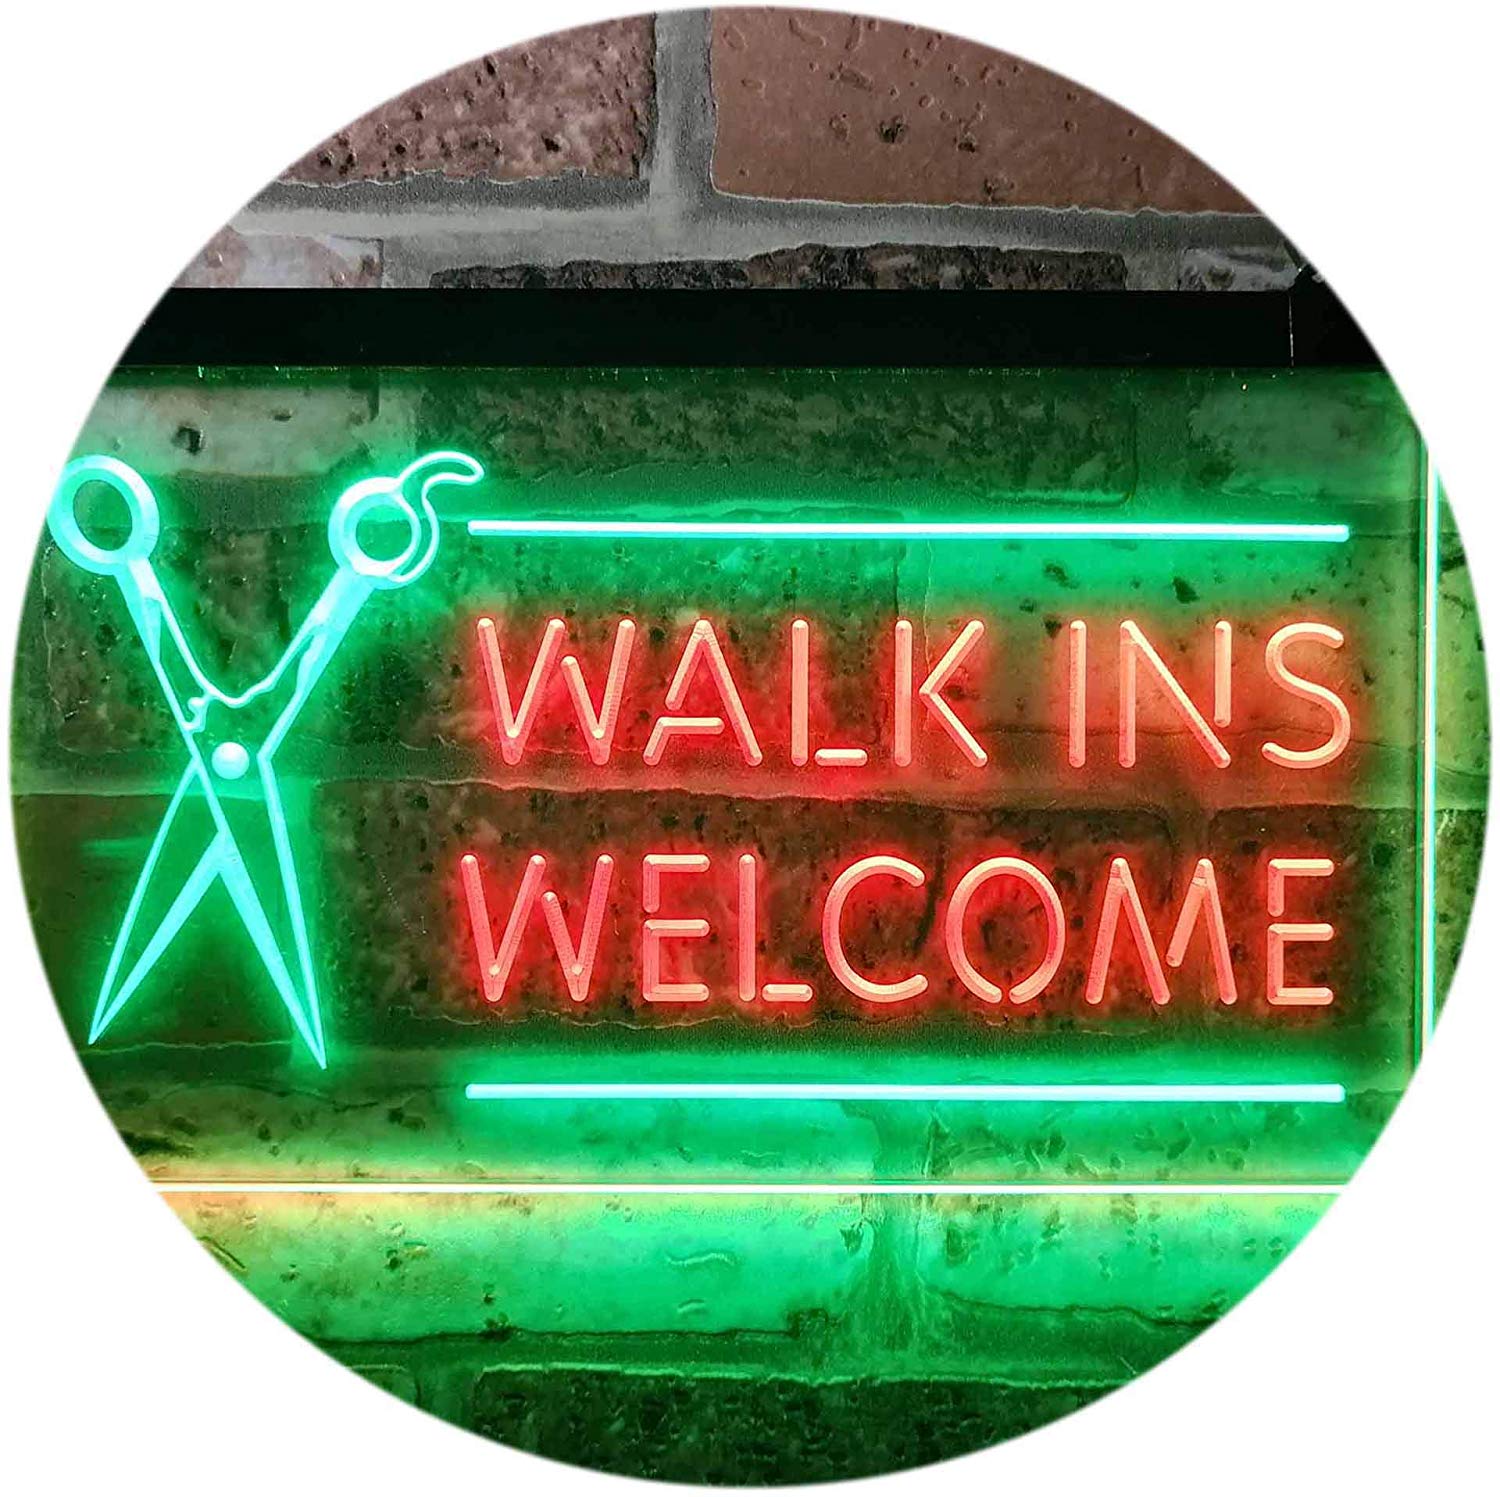 Barber Salon Hair Cuts Walk Ins Welcome LED Neon Light Sign - Way Up Gifts